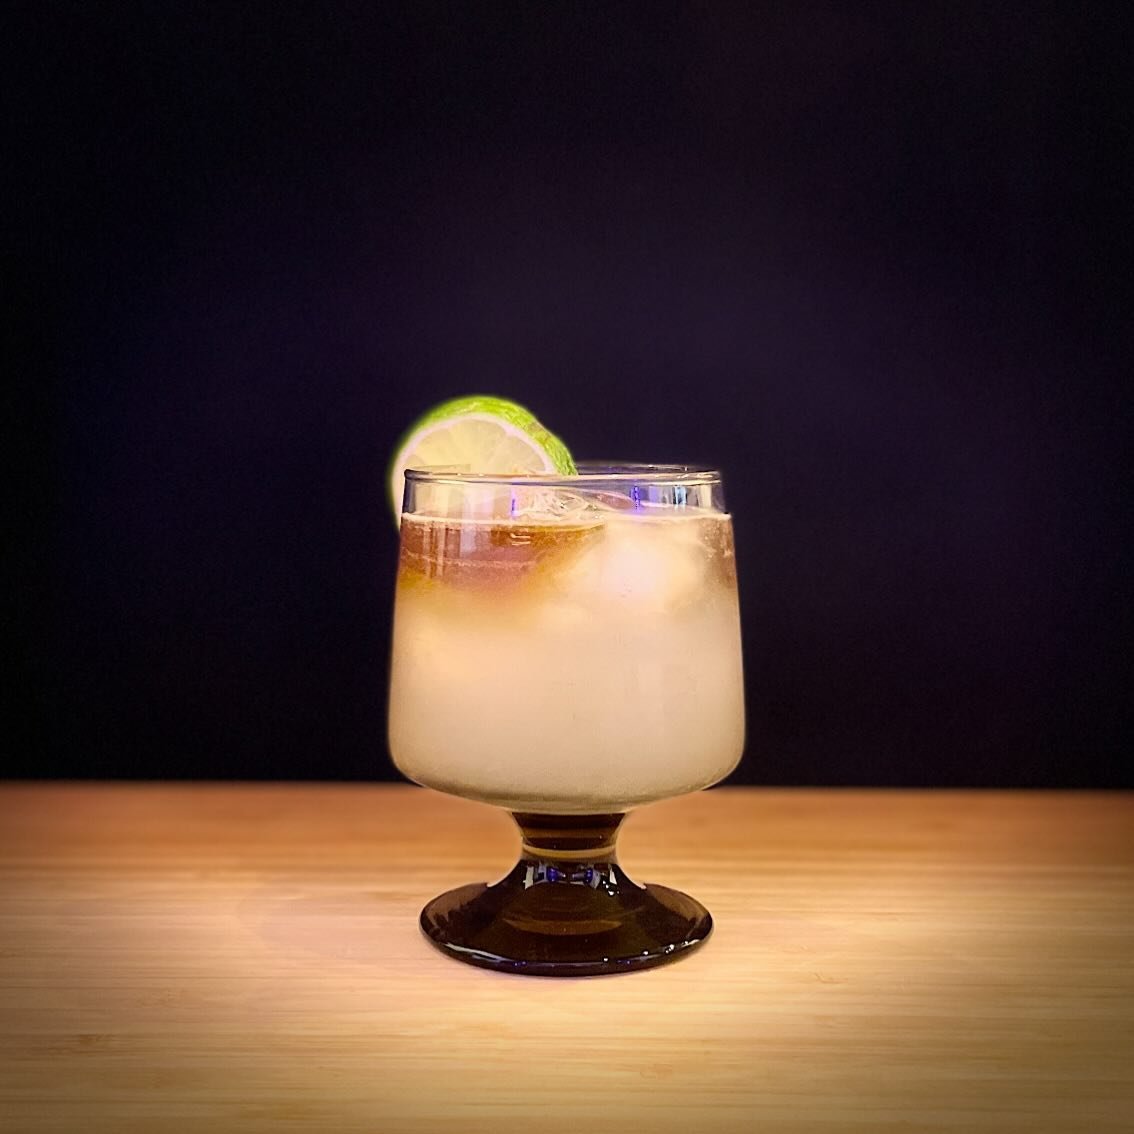 Here&rsquo;s a fun twist to try:

Marzipan Gimlet

1.5 oz Mad Lab Gin8
.75 oz fresh lime
.75 oz simple syrup 

Shake &amp; strain over fresh ice

Float .5 oz Mad Laboratory Godfather 🤤

#drinks #stircrazycocktails #cocktails #cocktail #cocktailbar #